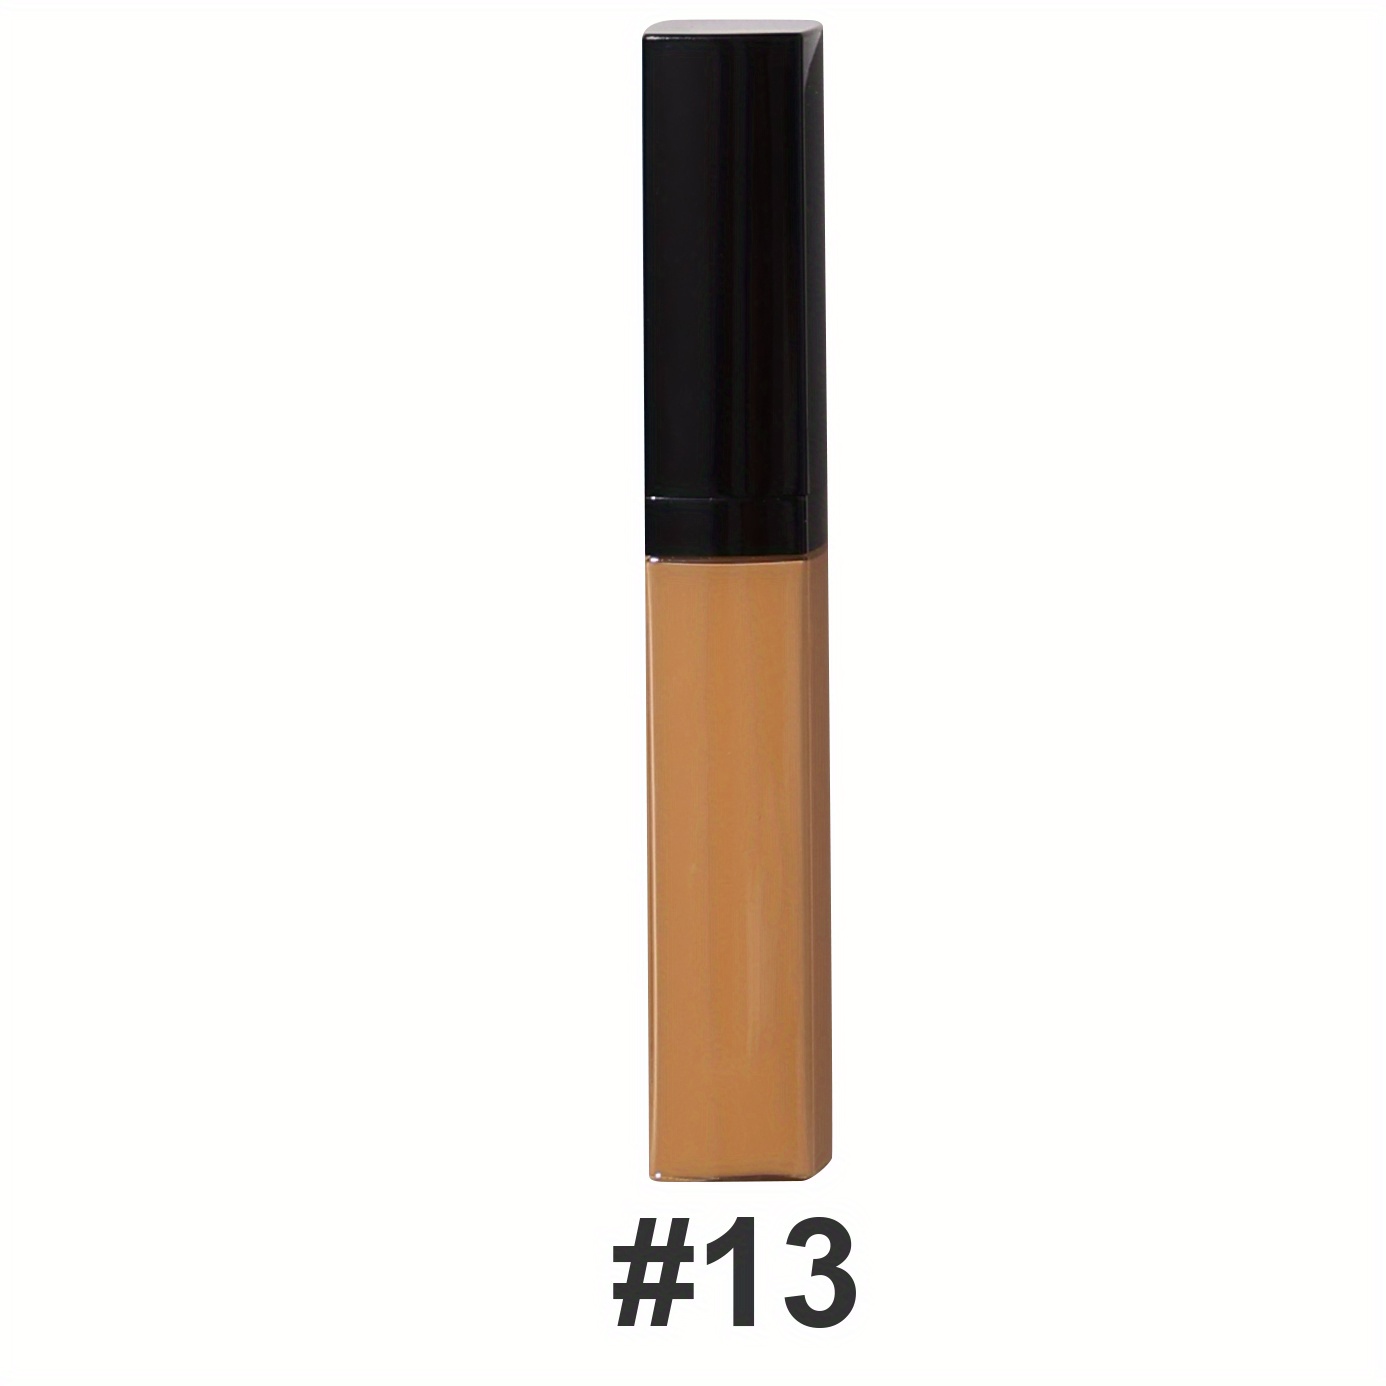 ❤ MakeupByJoyce ❤** !: Swatches + Comparisons - Chanel Foundations +  Concealers